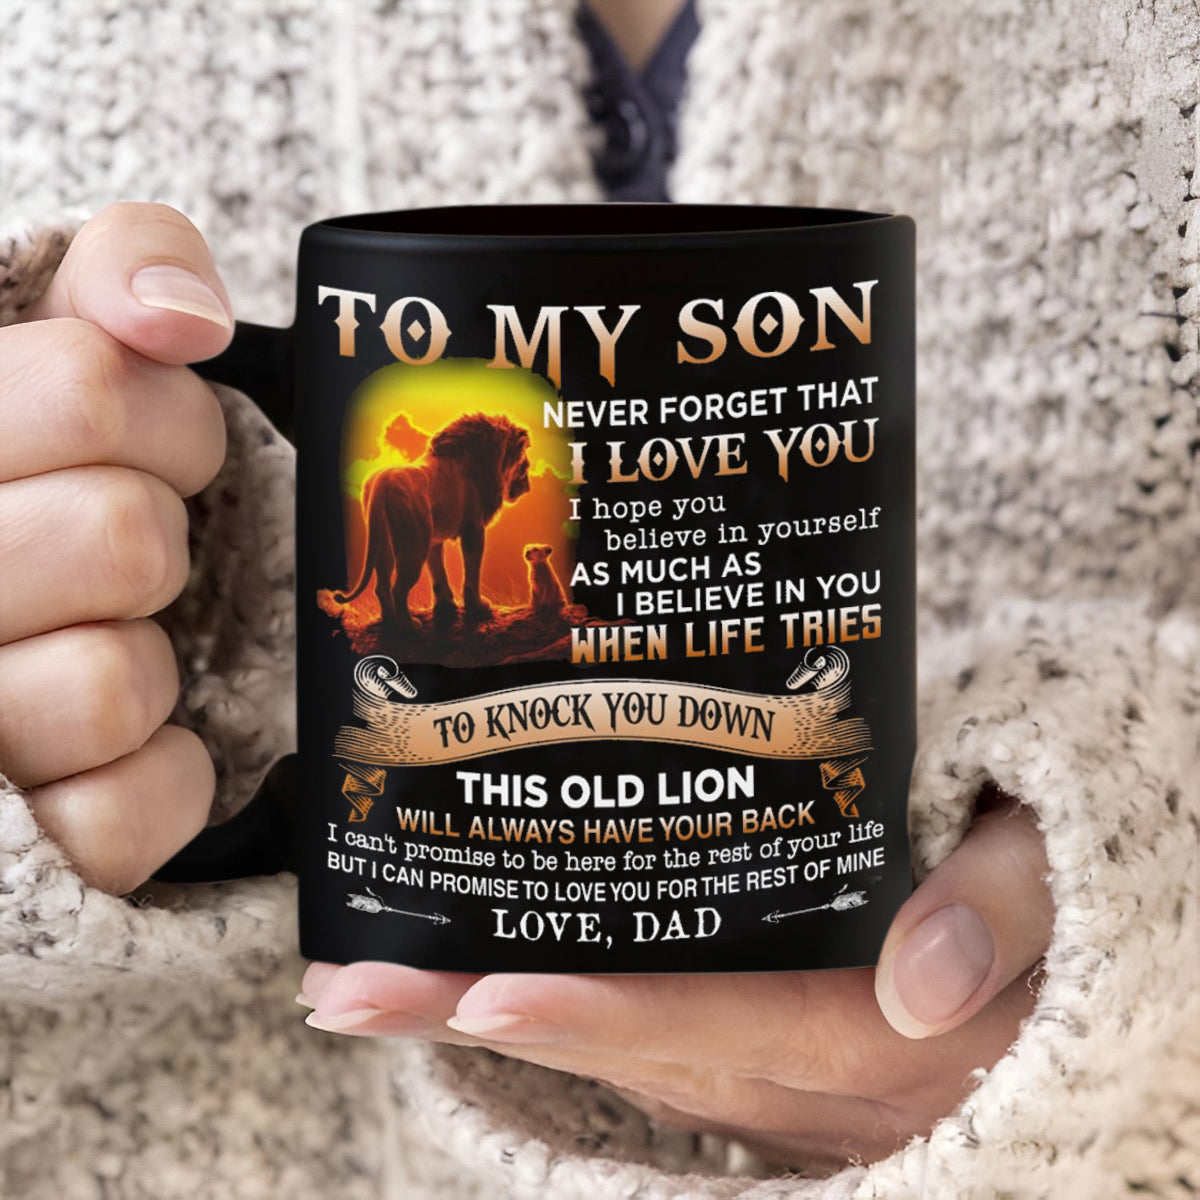 To my Son Love, dad Mugs